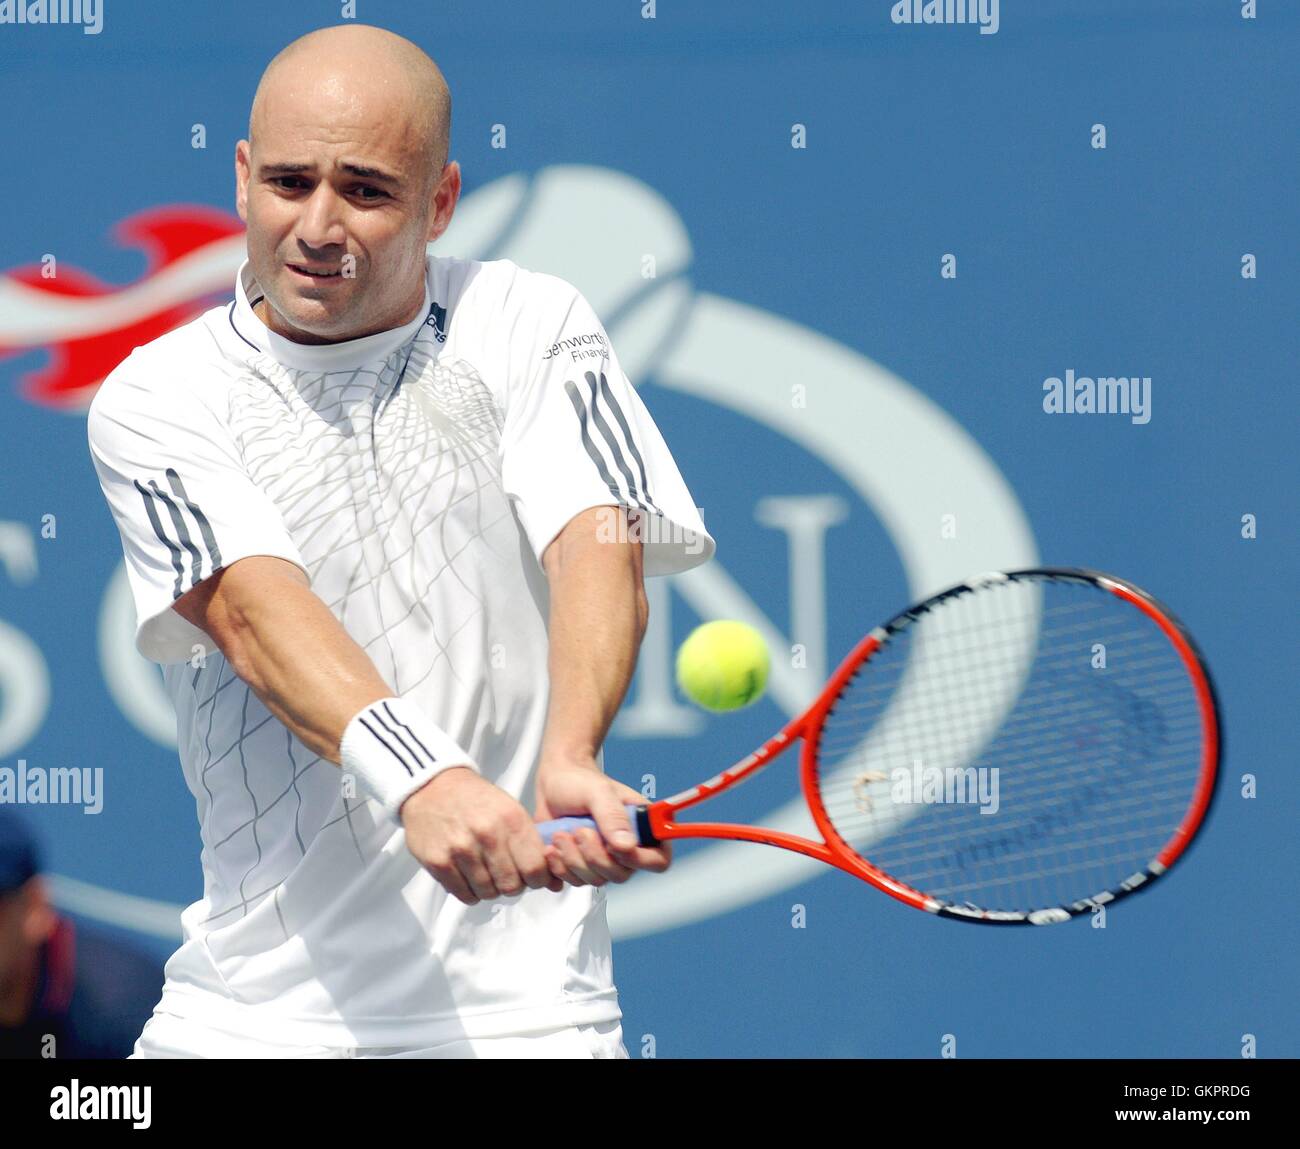 US open at The Billie Jean King National Tennis Center: Andre Agassi Vs.  Benjamin Becker - Andre Agassi waves to the crowd as he walks out on the  court for his match.